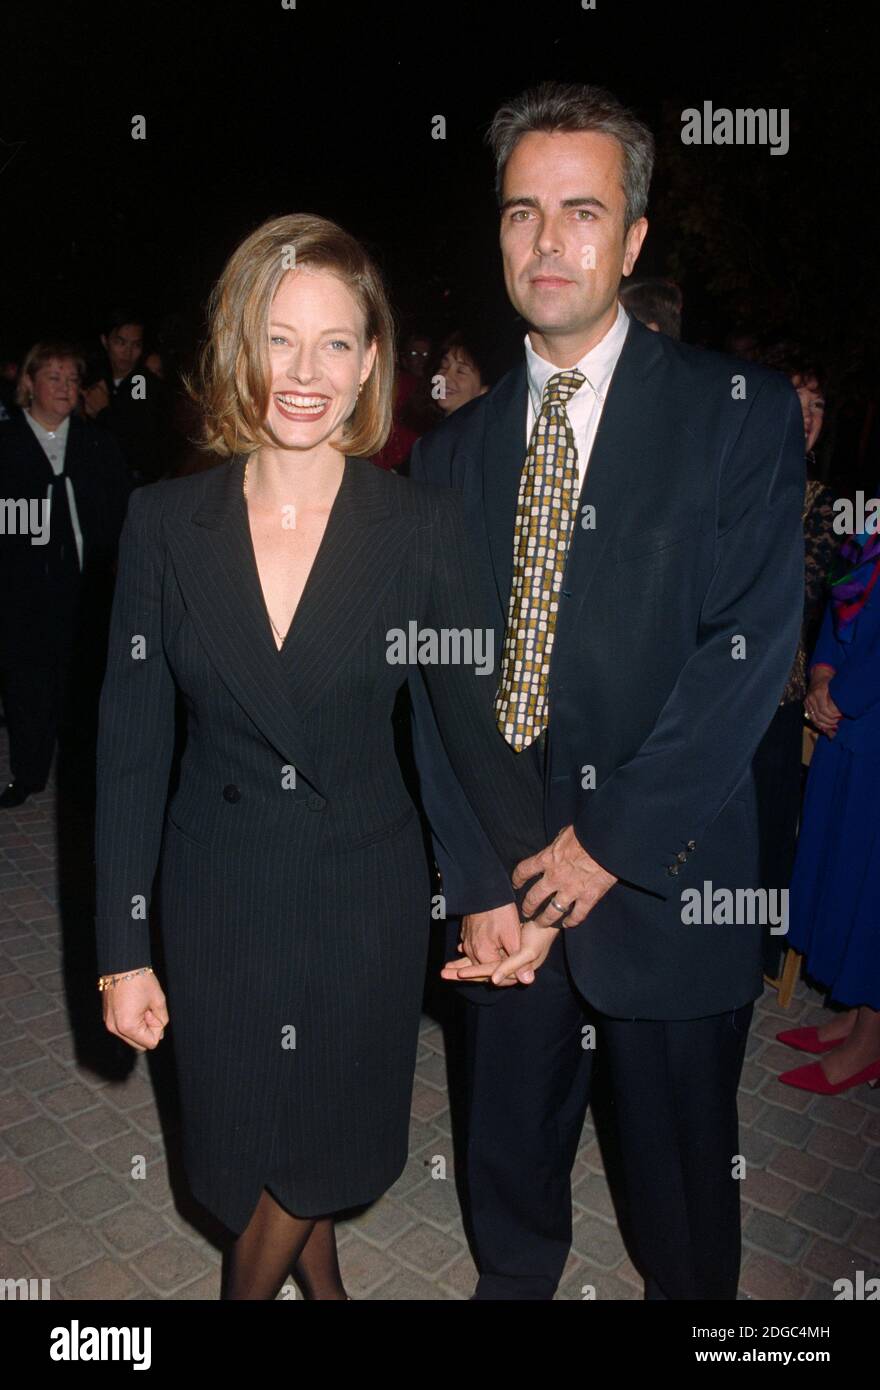 ARCHIVE: LOS ANGELES, CA. October 30, 1995: Director/actress Jodie Foster & writer/actor Randy Stone at the premiere of 'Home for the Holidays' in Los Angeles. File photo © Paul Smith/Featureflash Stock Photo